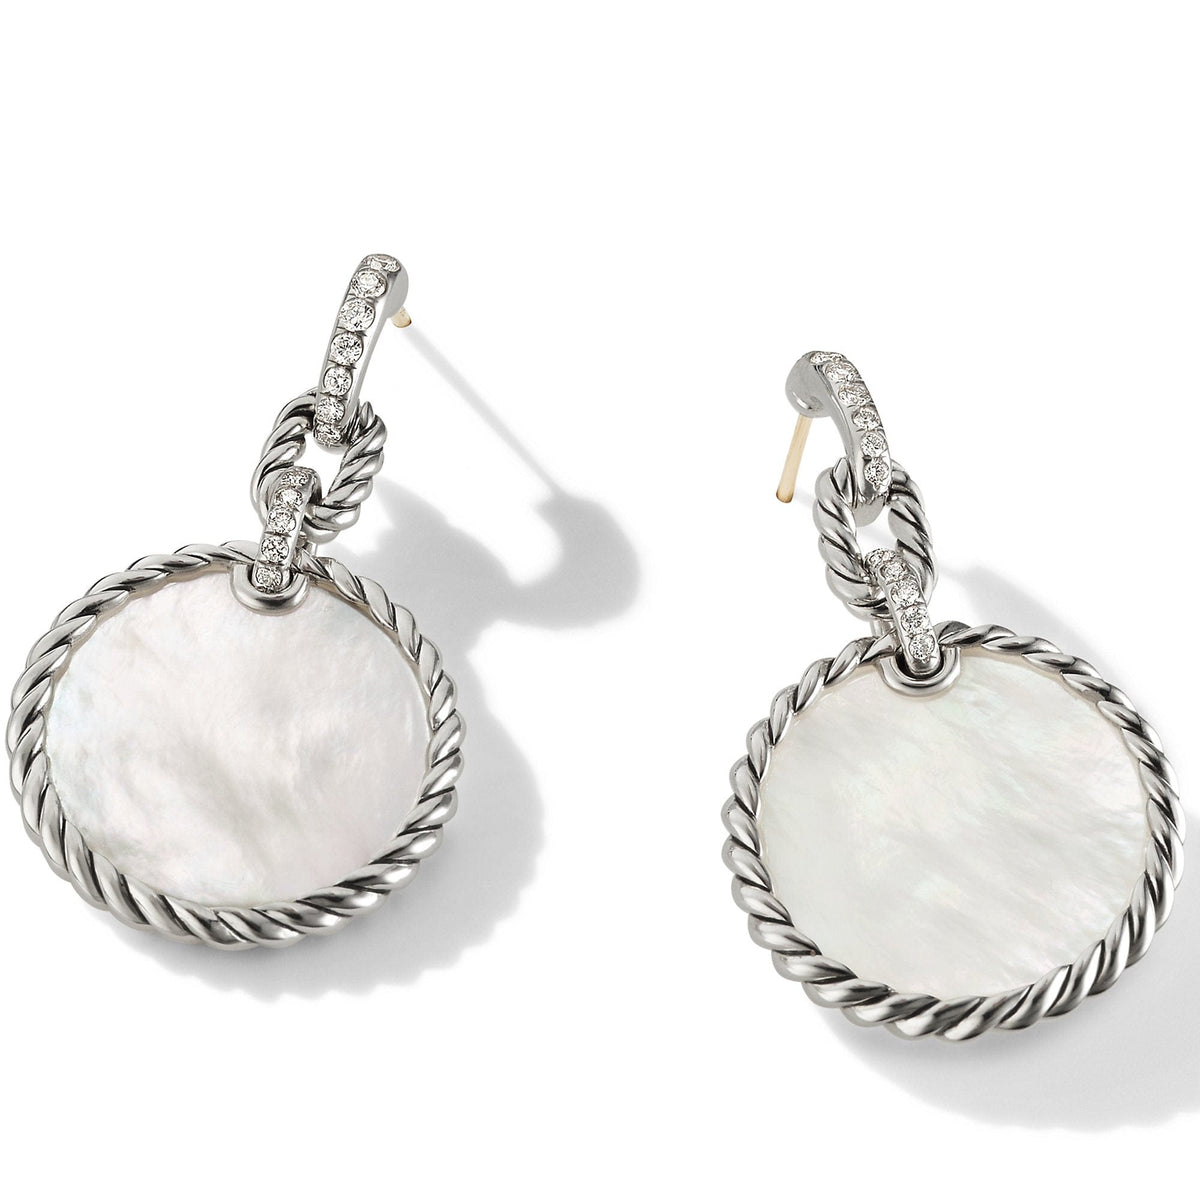 DY Elements Drop Earrings with Mother of Pearl and Pavé Diamonds